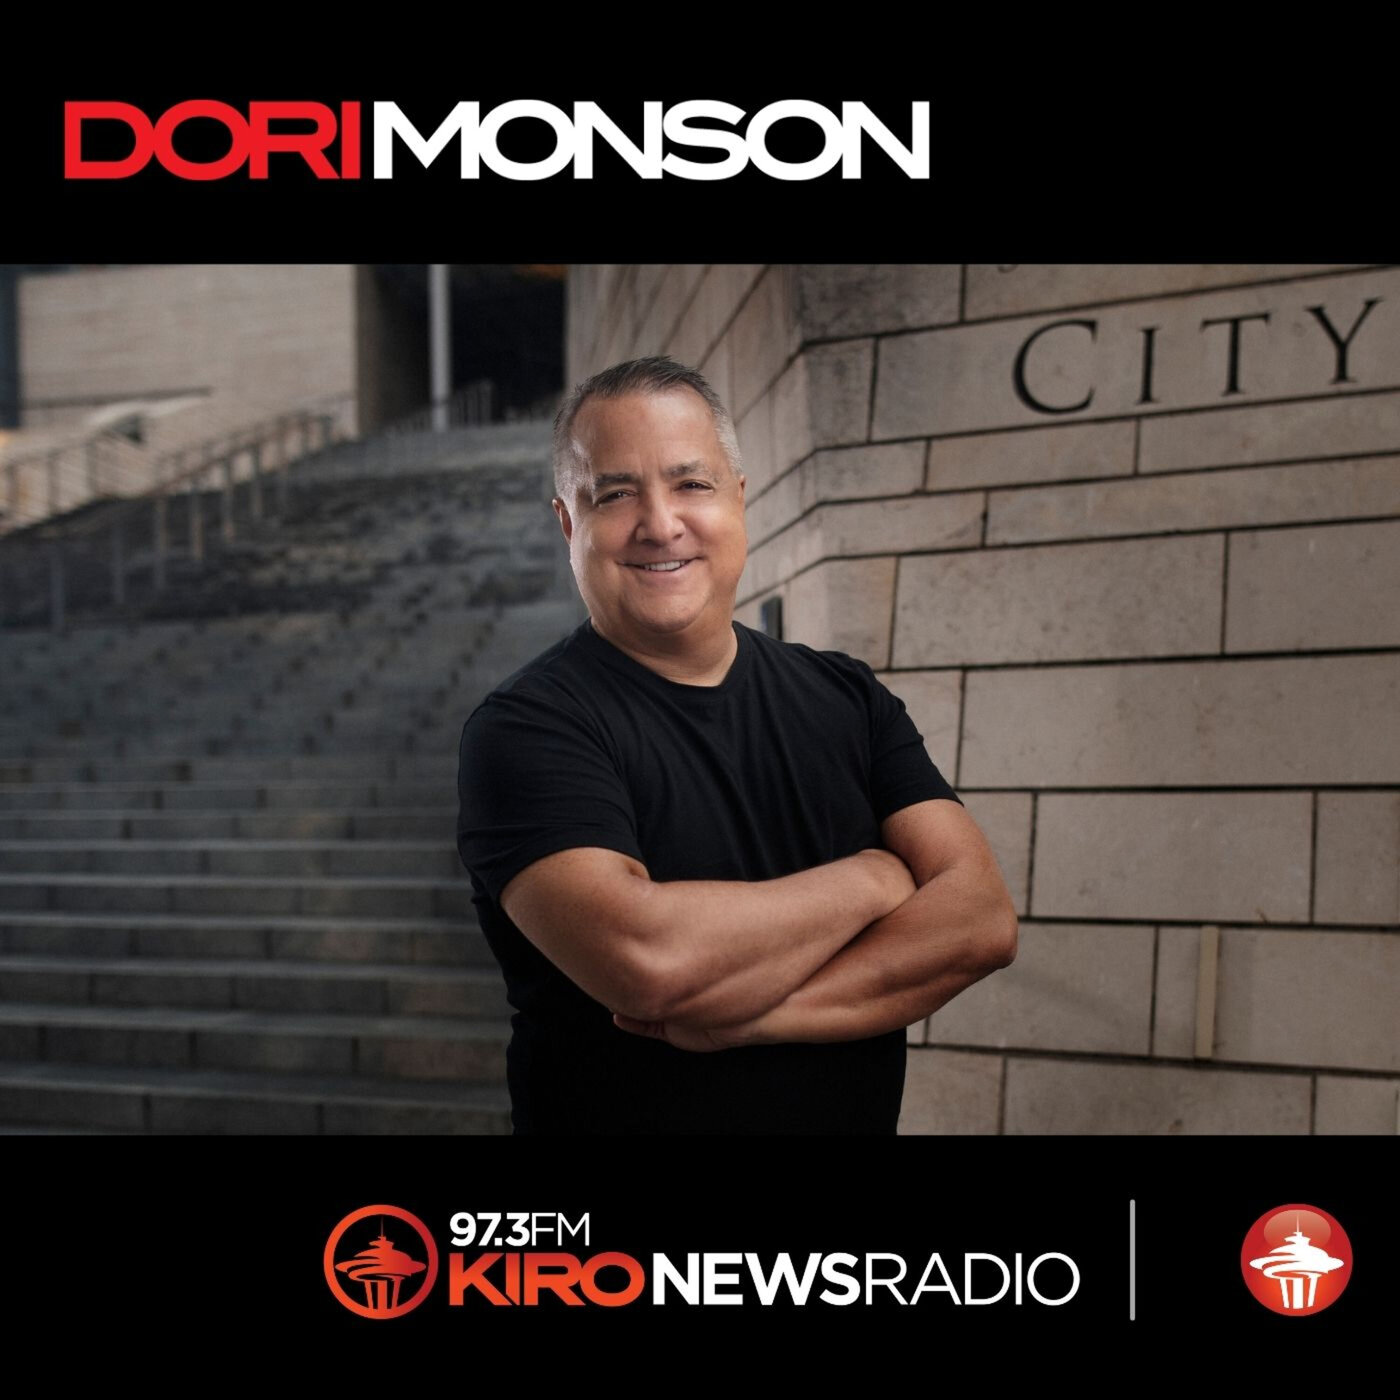 The Very Best of the Dori Monson Show, Day 1: Hour 2